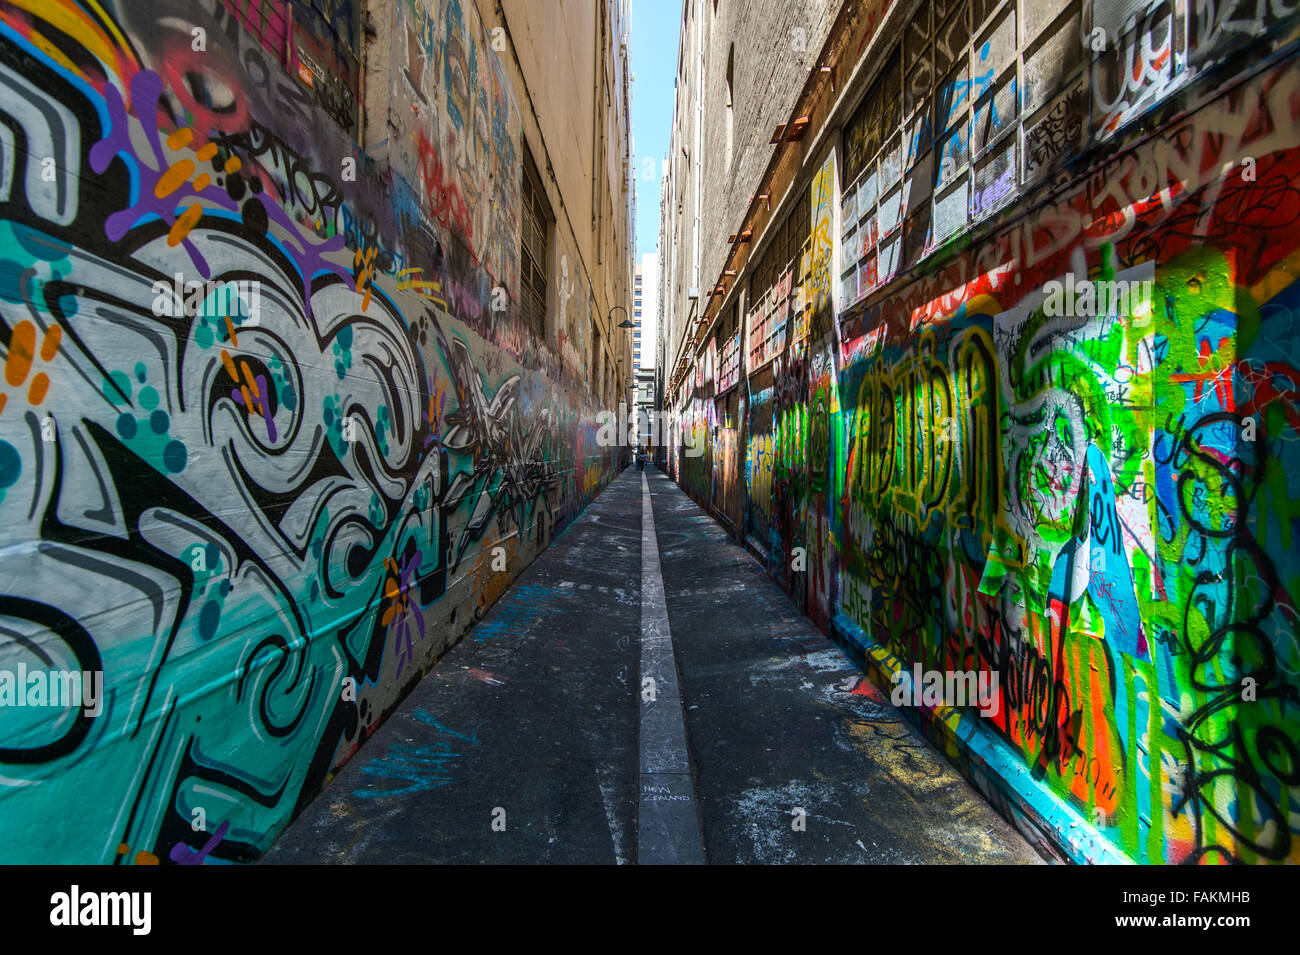 Street art in the lanes of Melbourne. Stock Photo